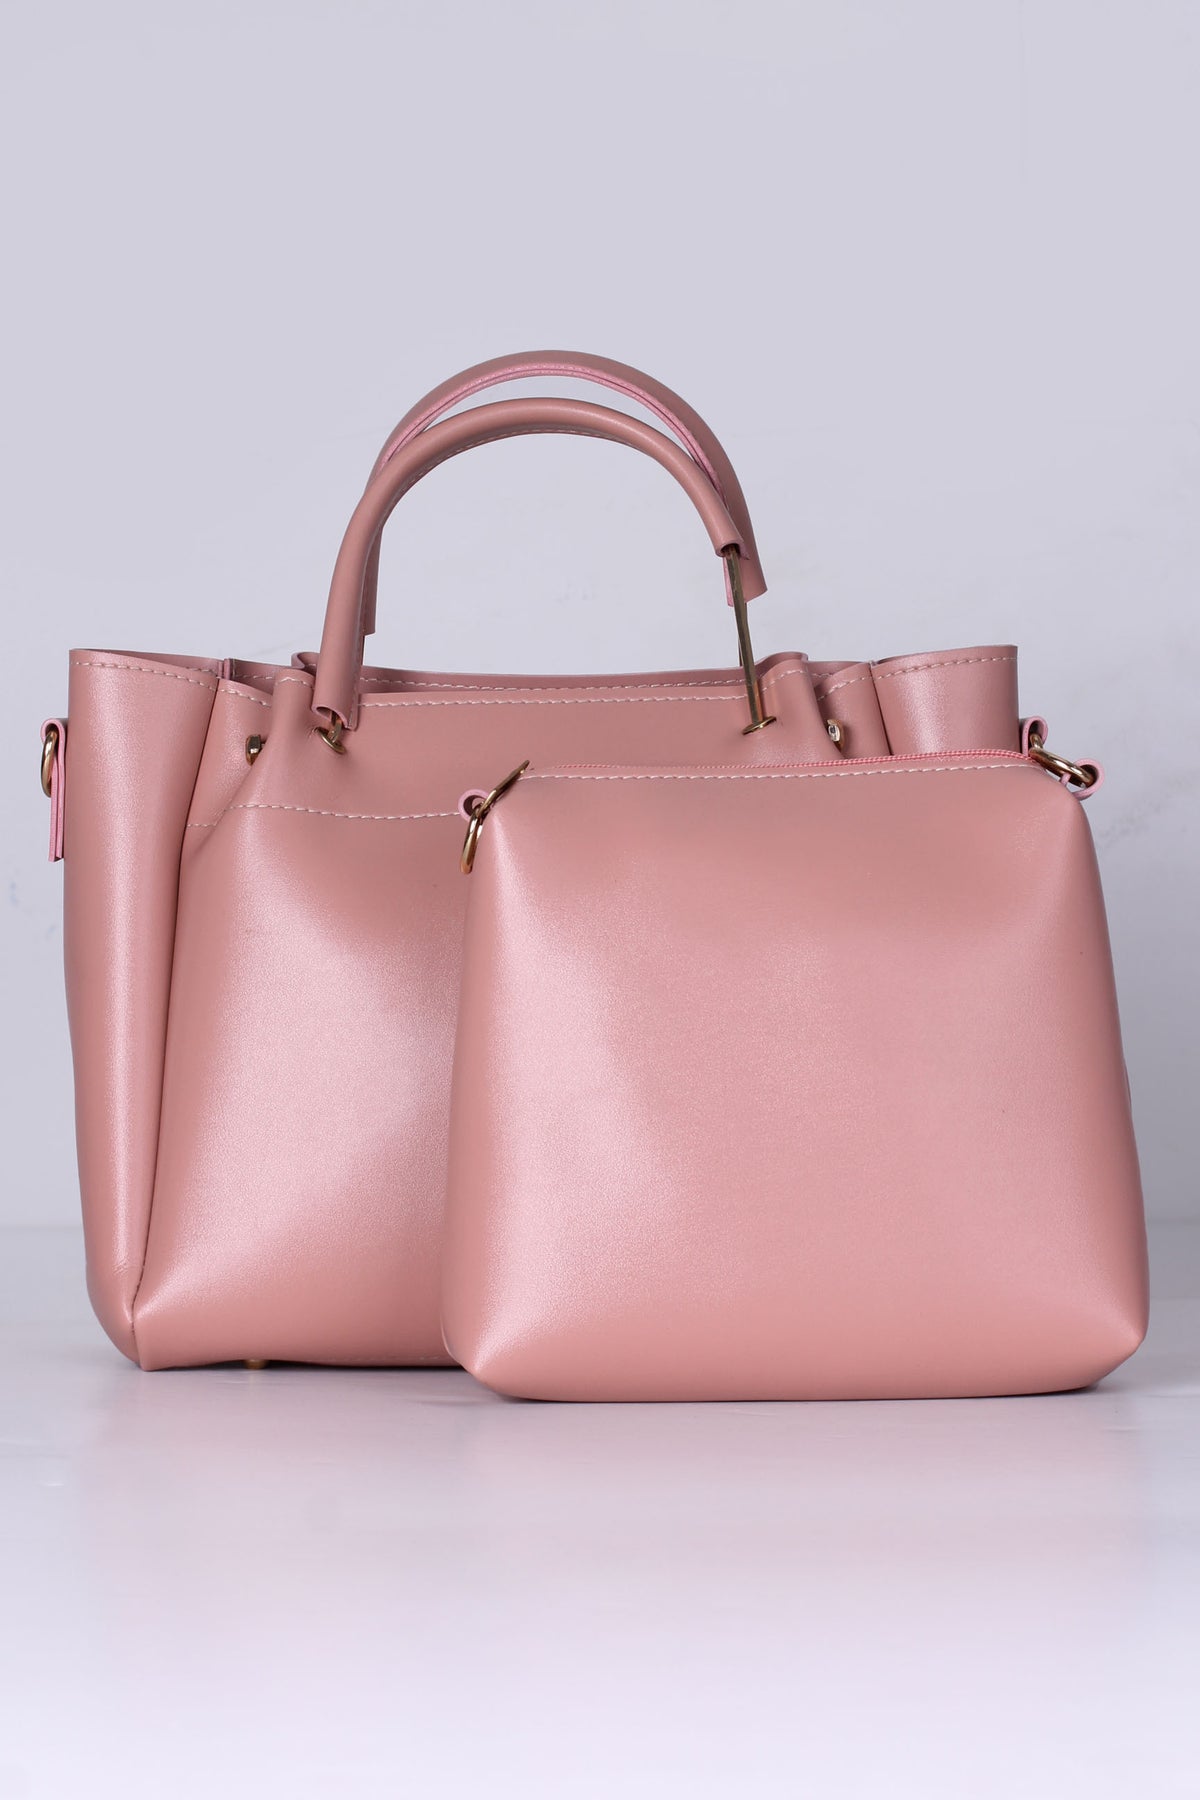 Hand Bags for Women |Ladies Purse T-Pink AI-255